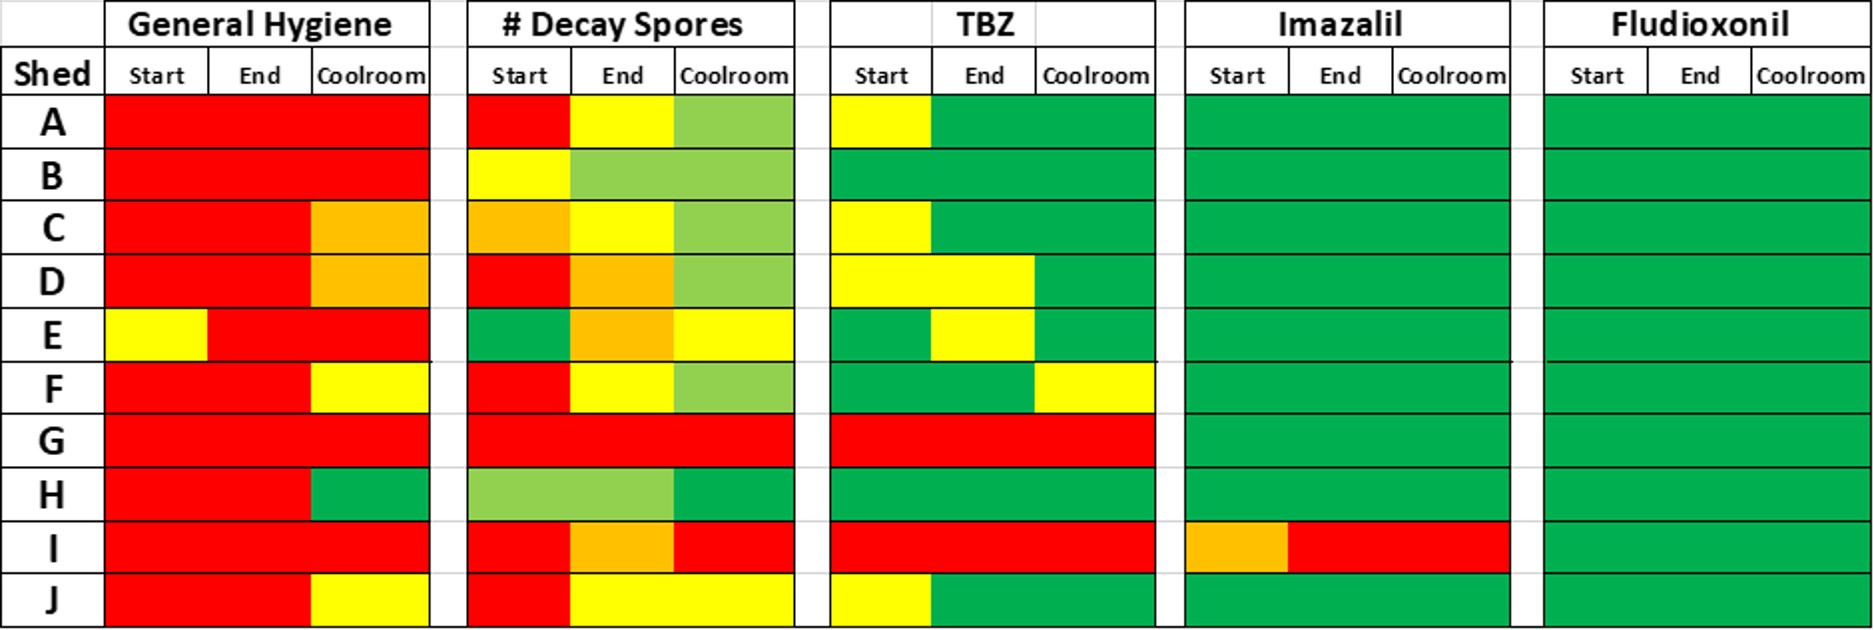 Table 1. Summary table of some results from the 2020 Sanitation and Fungicide Resistance Packinghouse Service. Plates were assessed at the start of the line, the end of the line and in the cool room for each packinghouse. 